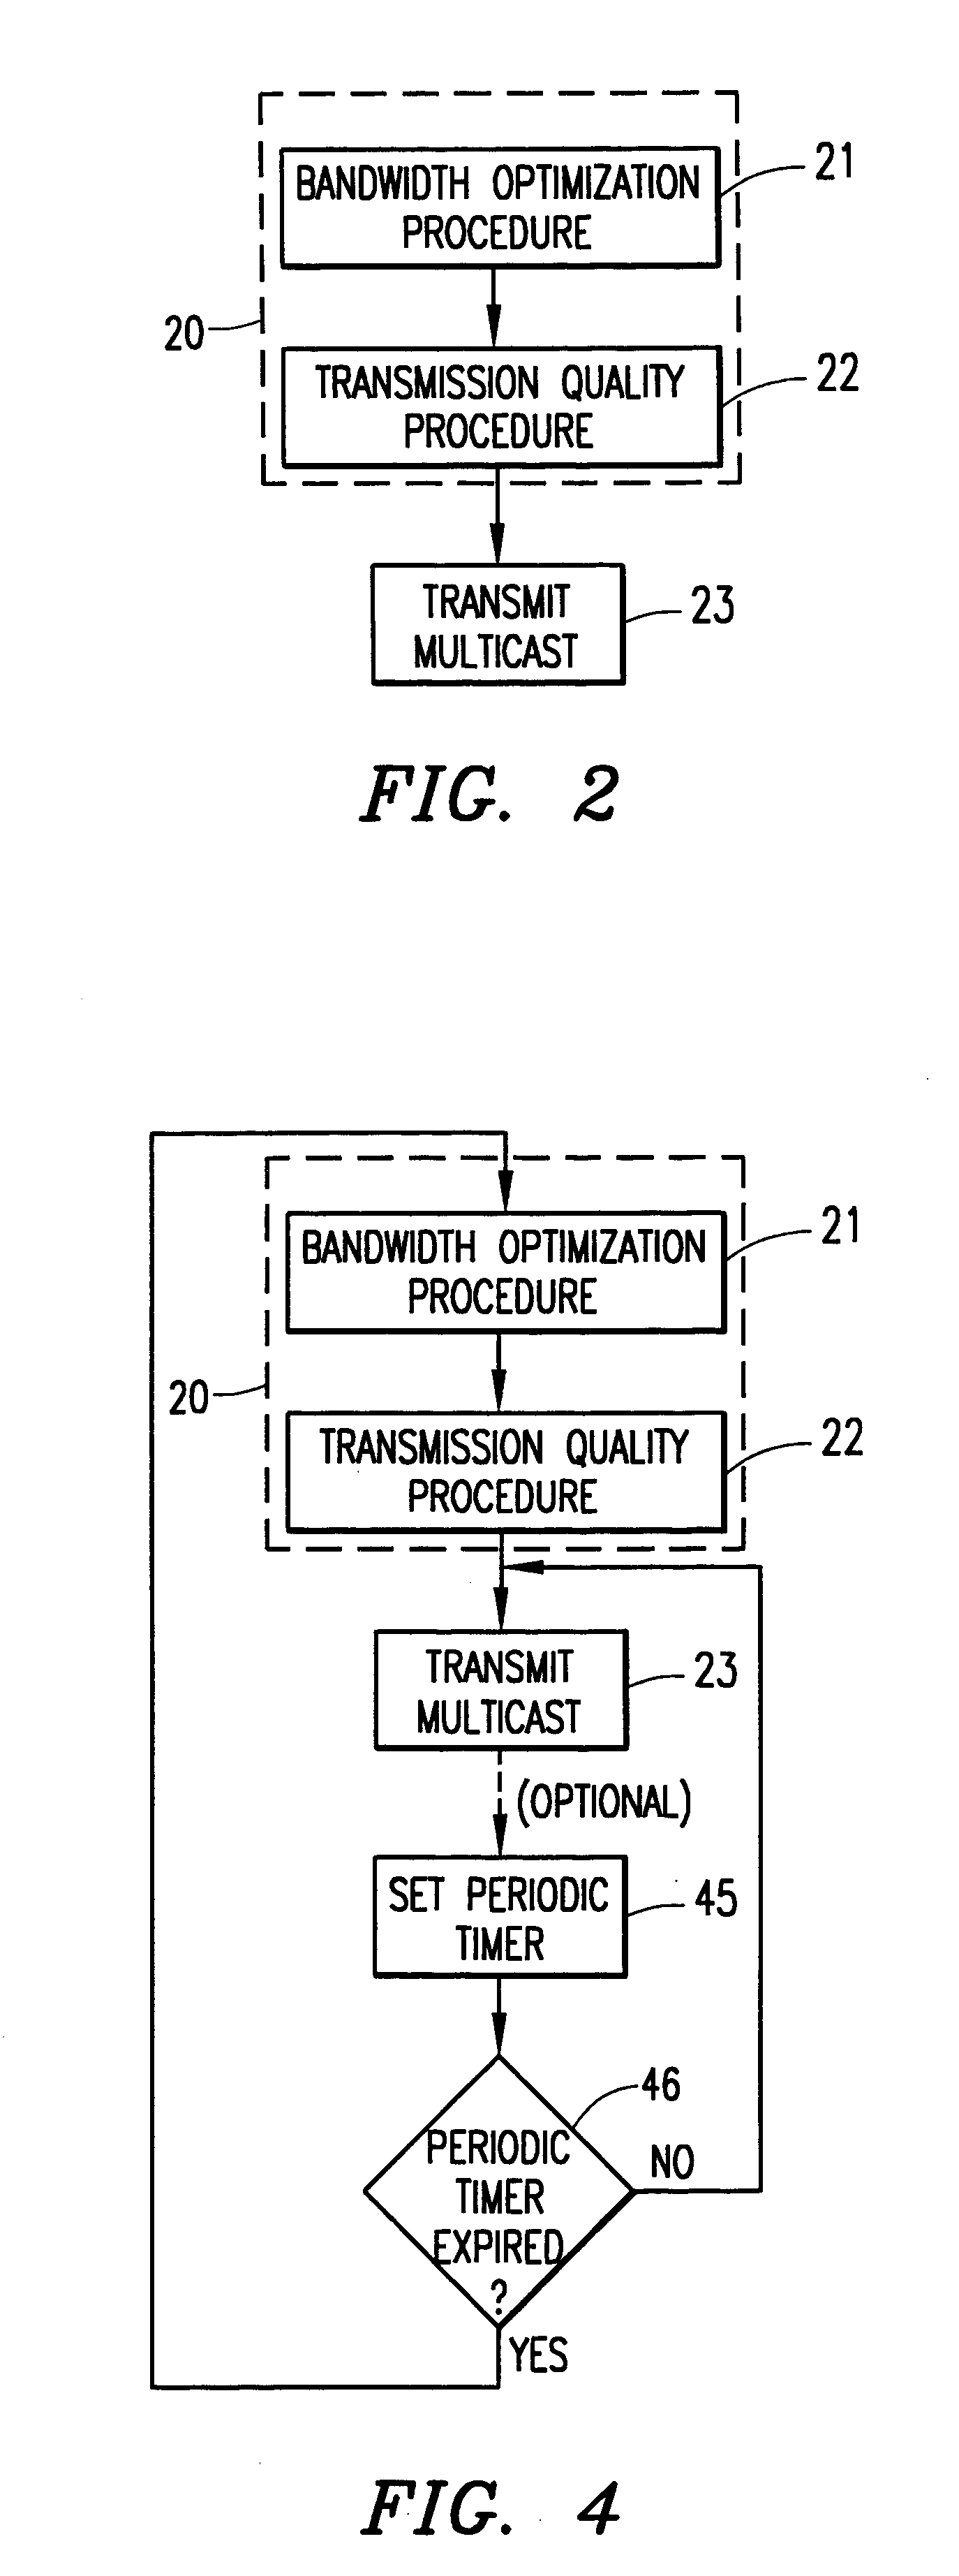 Method of broadcasting a quality over-the-air multicast